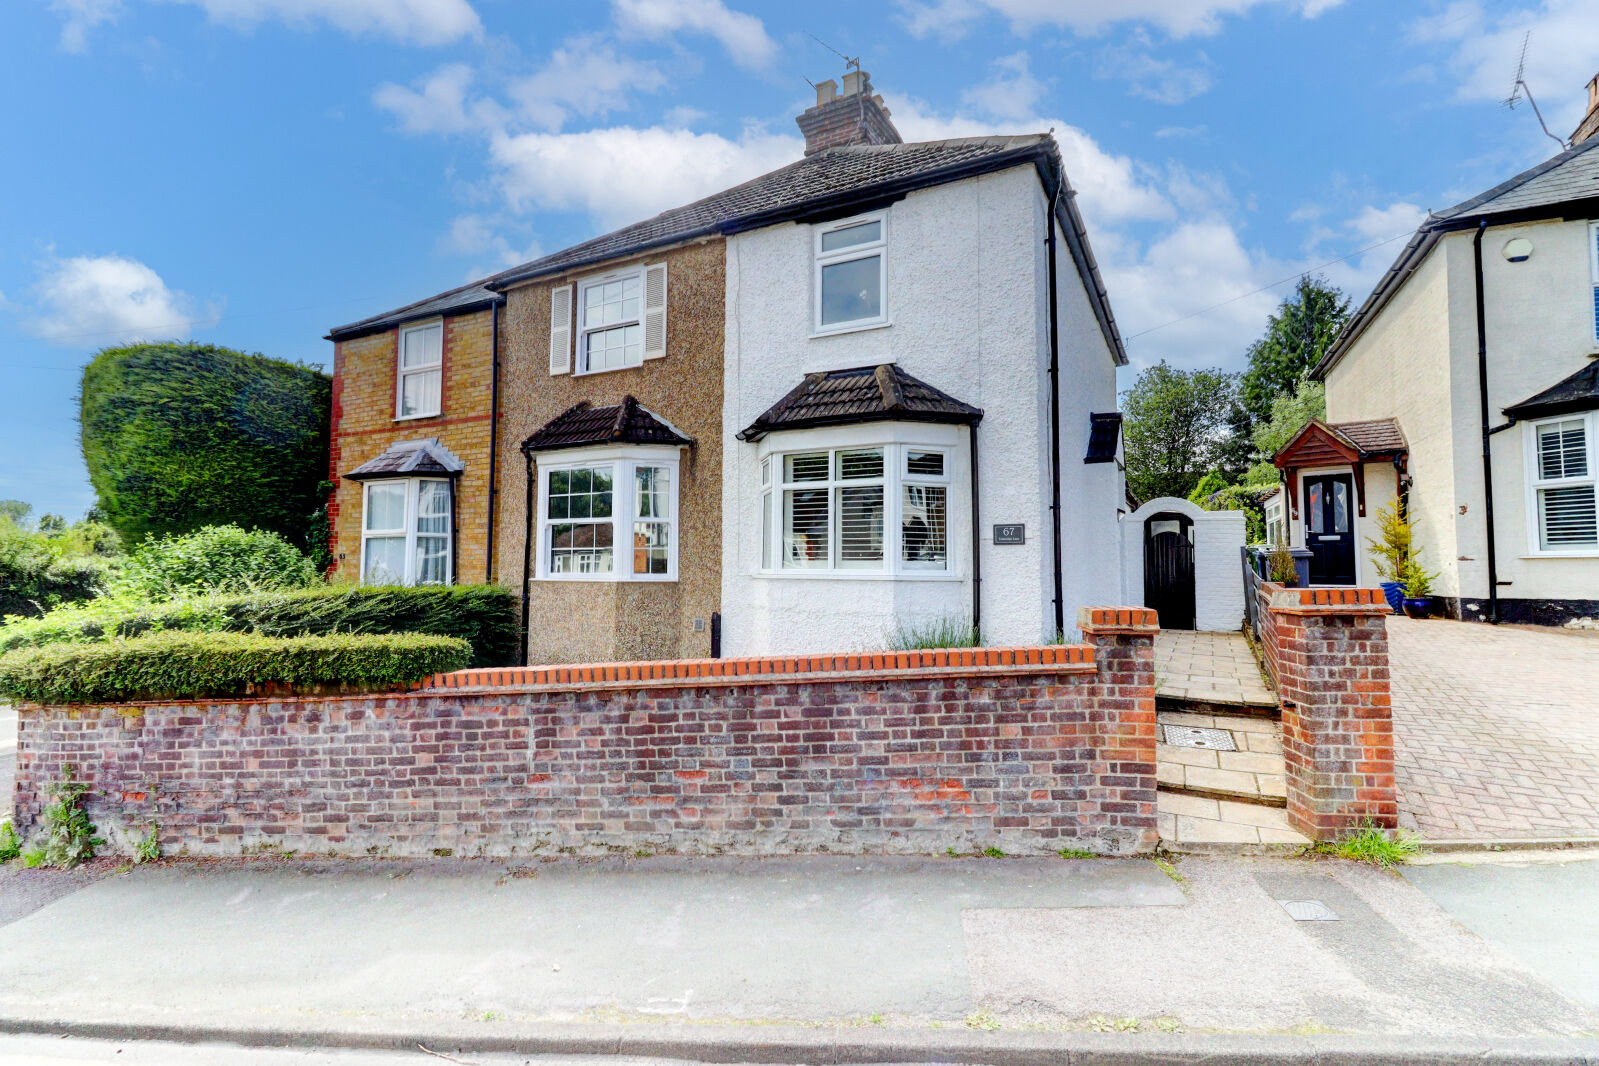 2 bedroom end terraced house for sale Totteridge Lane, High Wycombe, HP13, main image